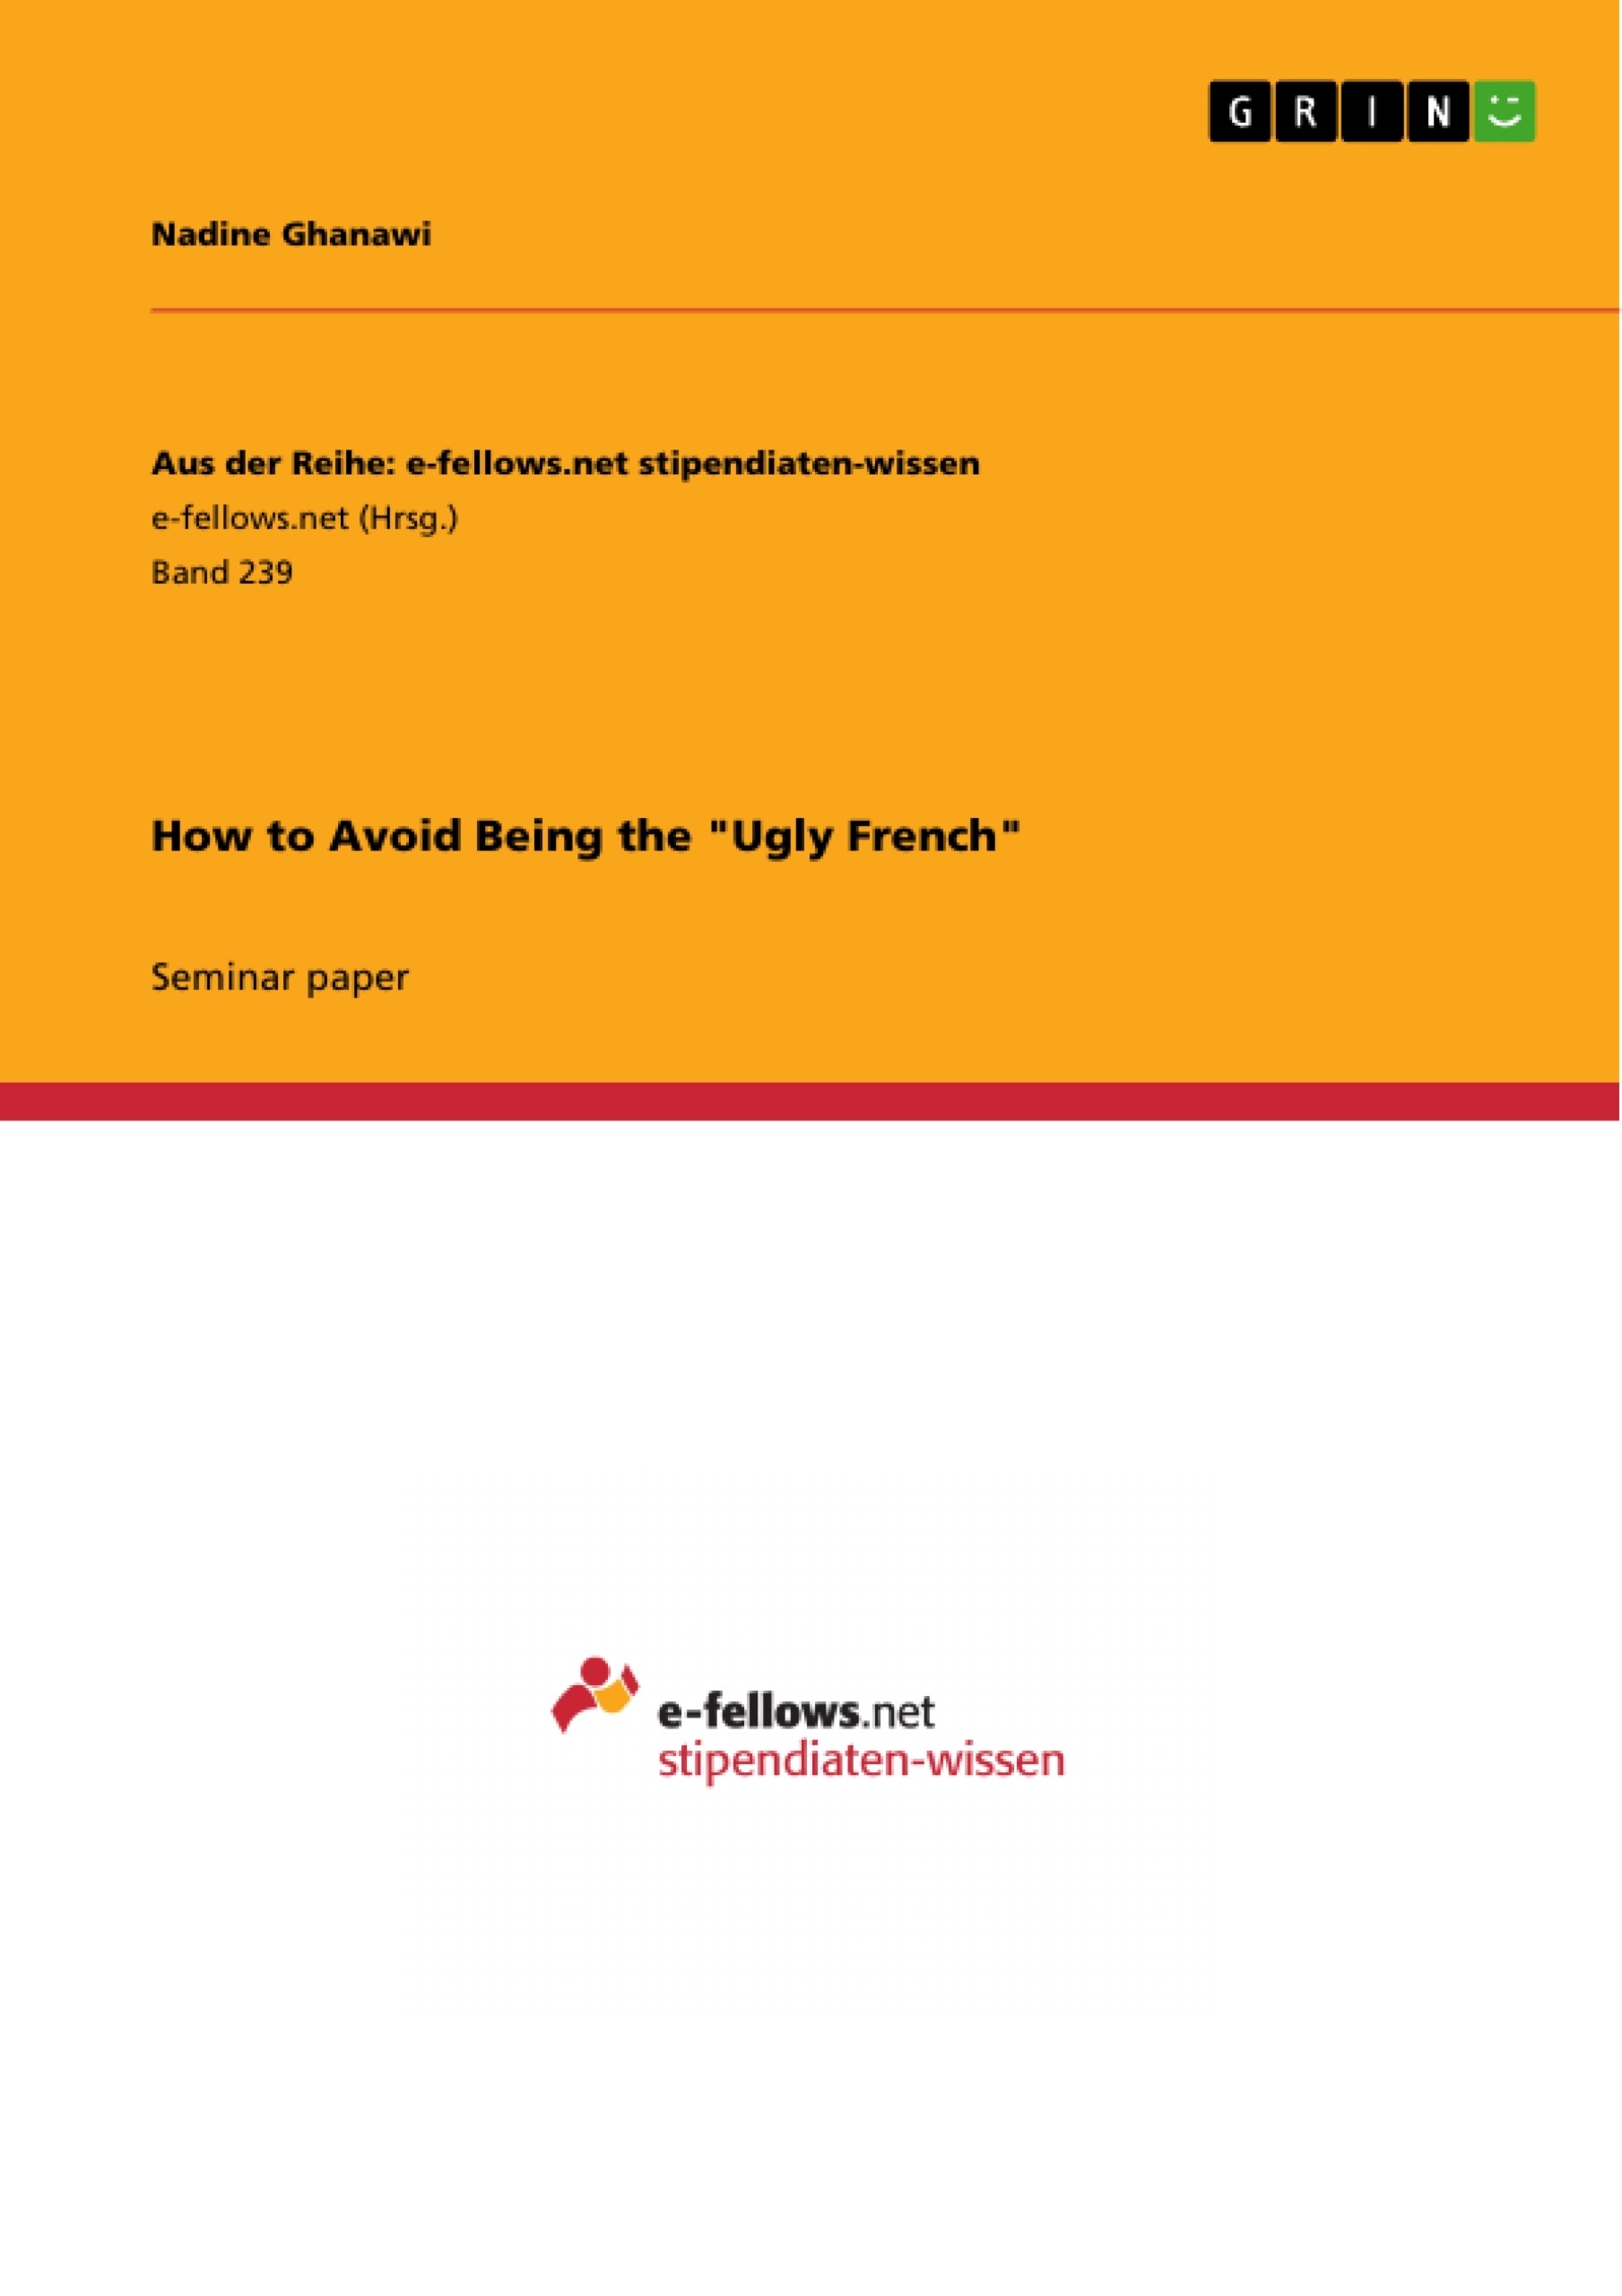 Title: How to Avoid Being the "Ugly French"